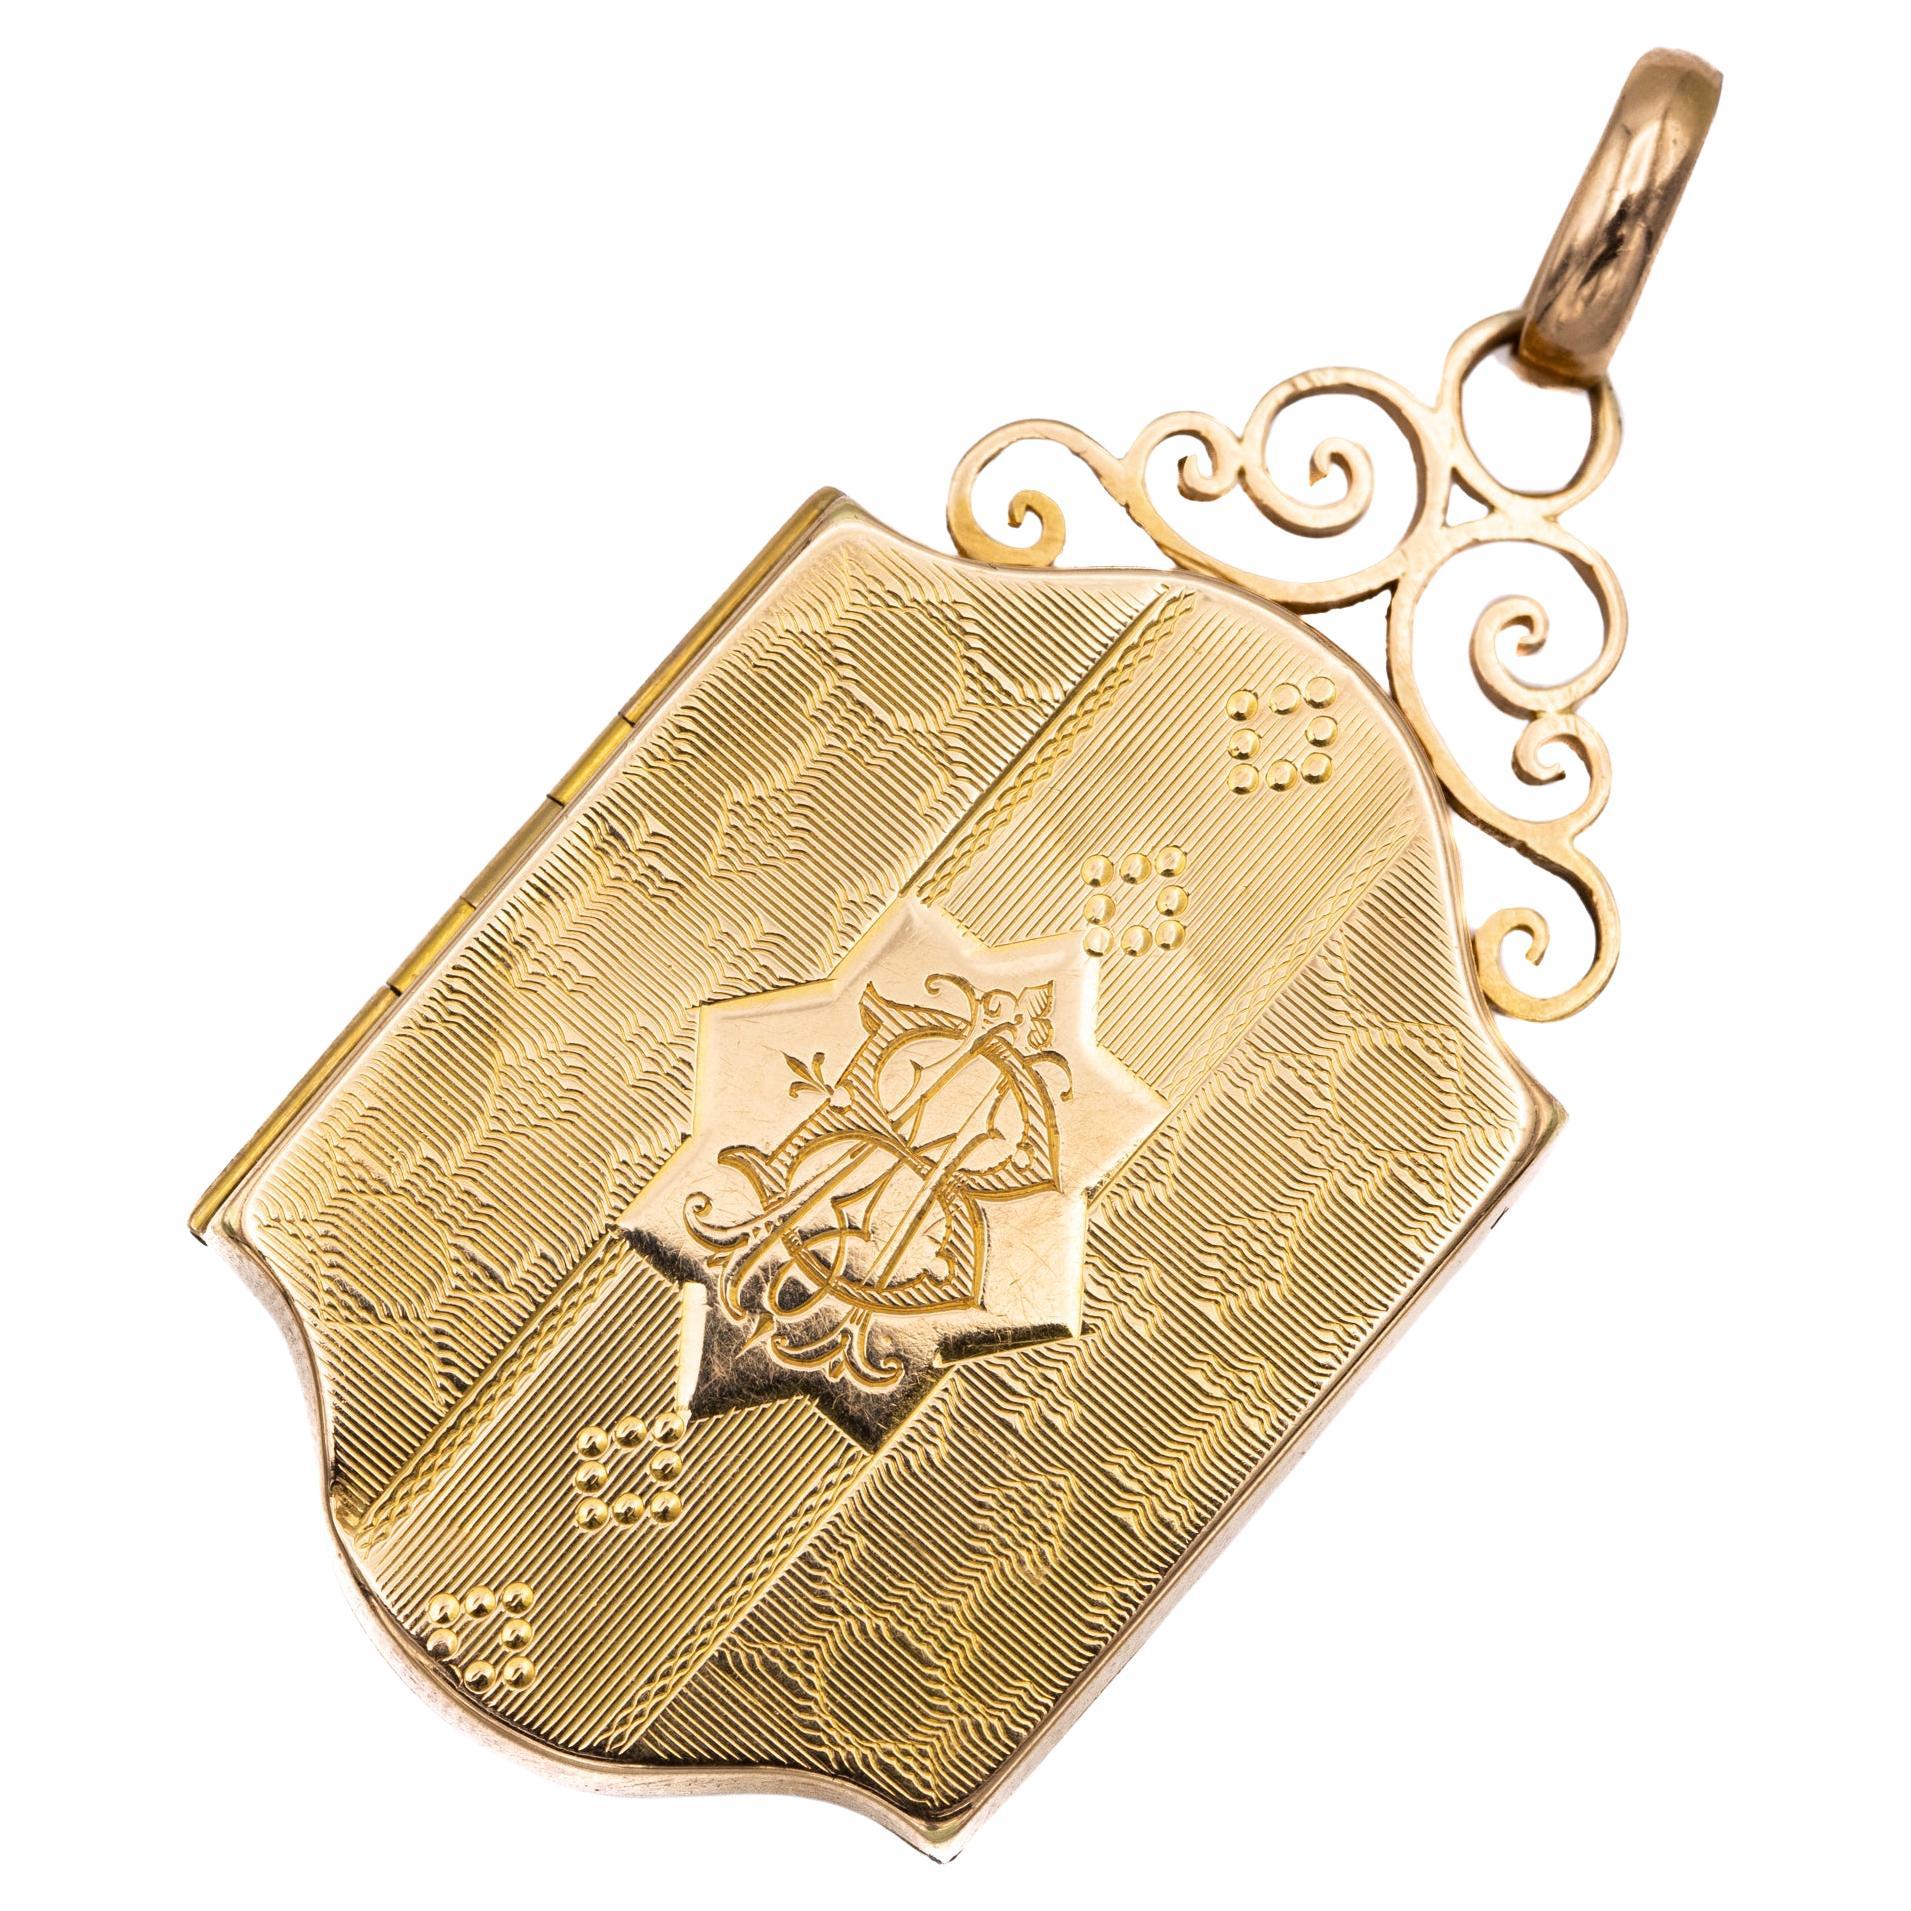 18k Antique gold locket - French solid gold - Napoleon III pendant - Victorian